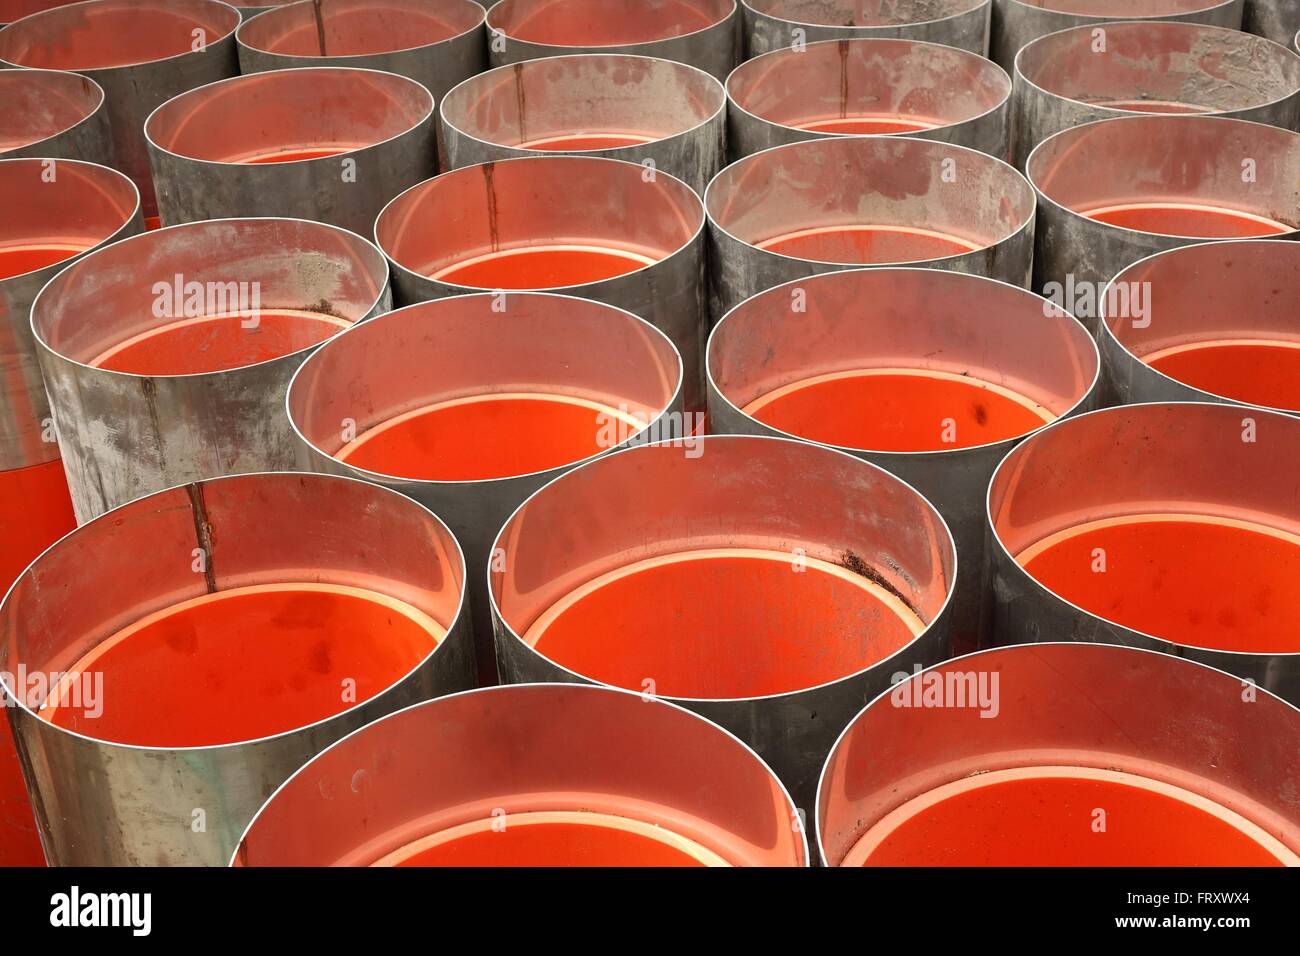 Large orange PVC pipes with stainless steel metal caps Stock Photo